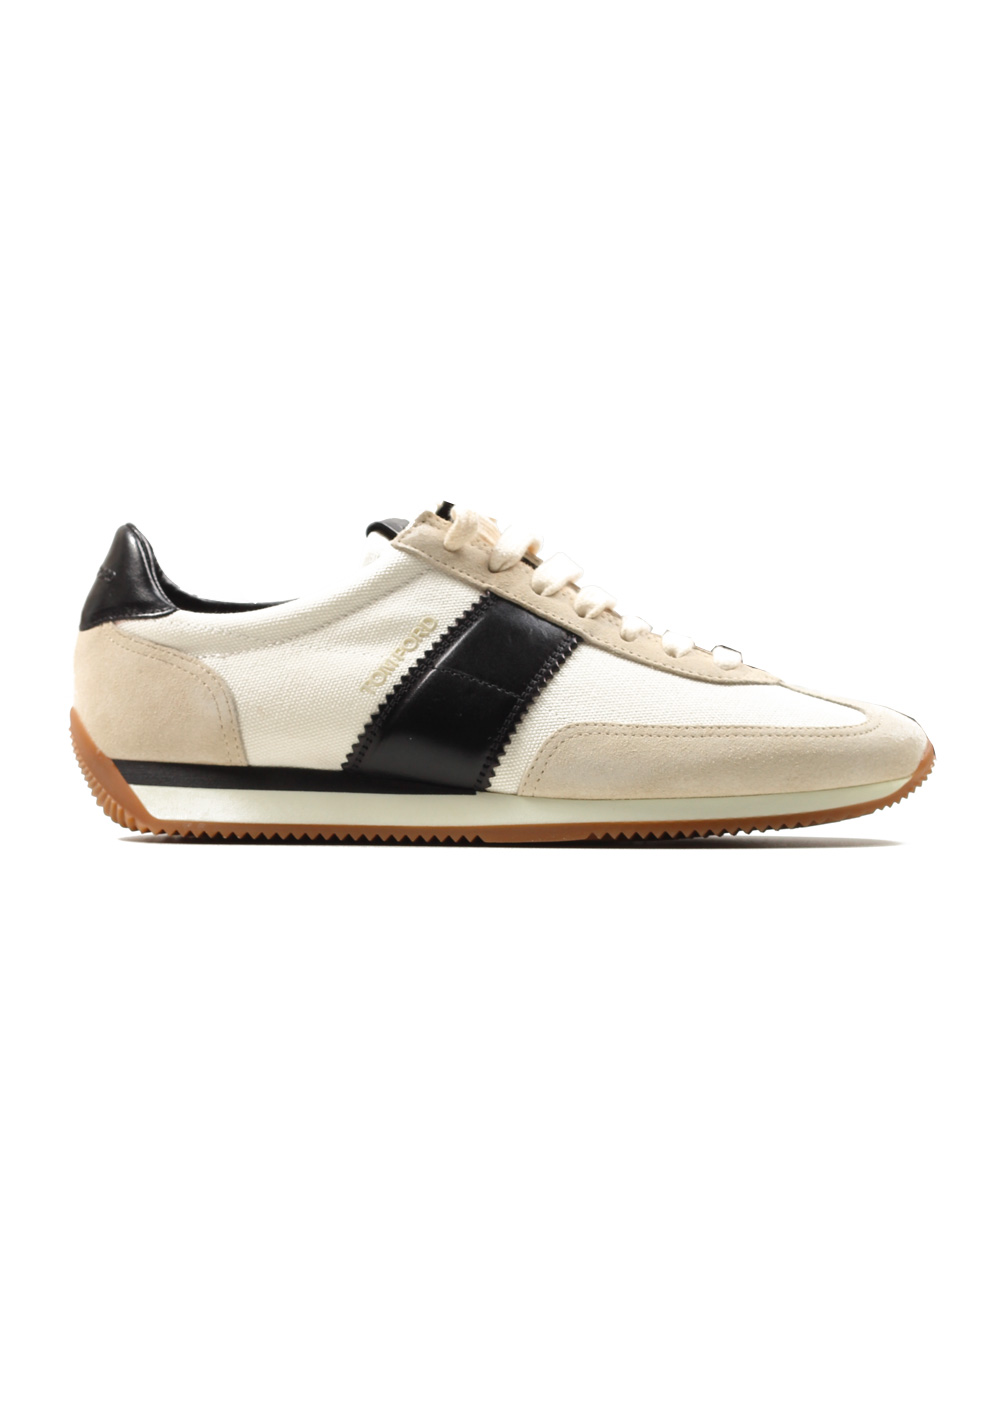 TOM FORD Orford Colorblock Suede White Black Trainer Sneaker Shoes Size 6 UK / 7 U.S. | Costume Limité